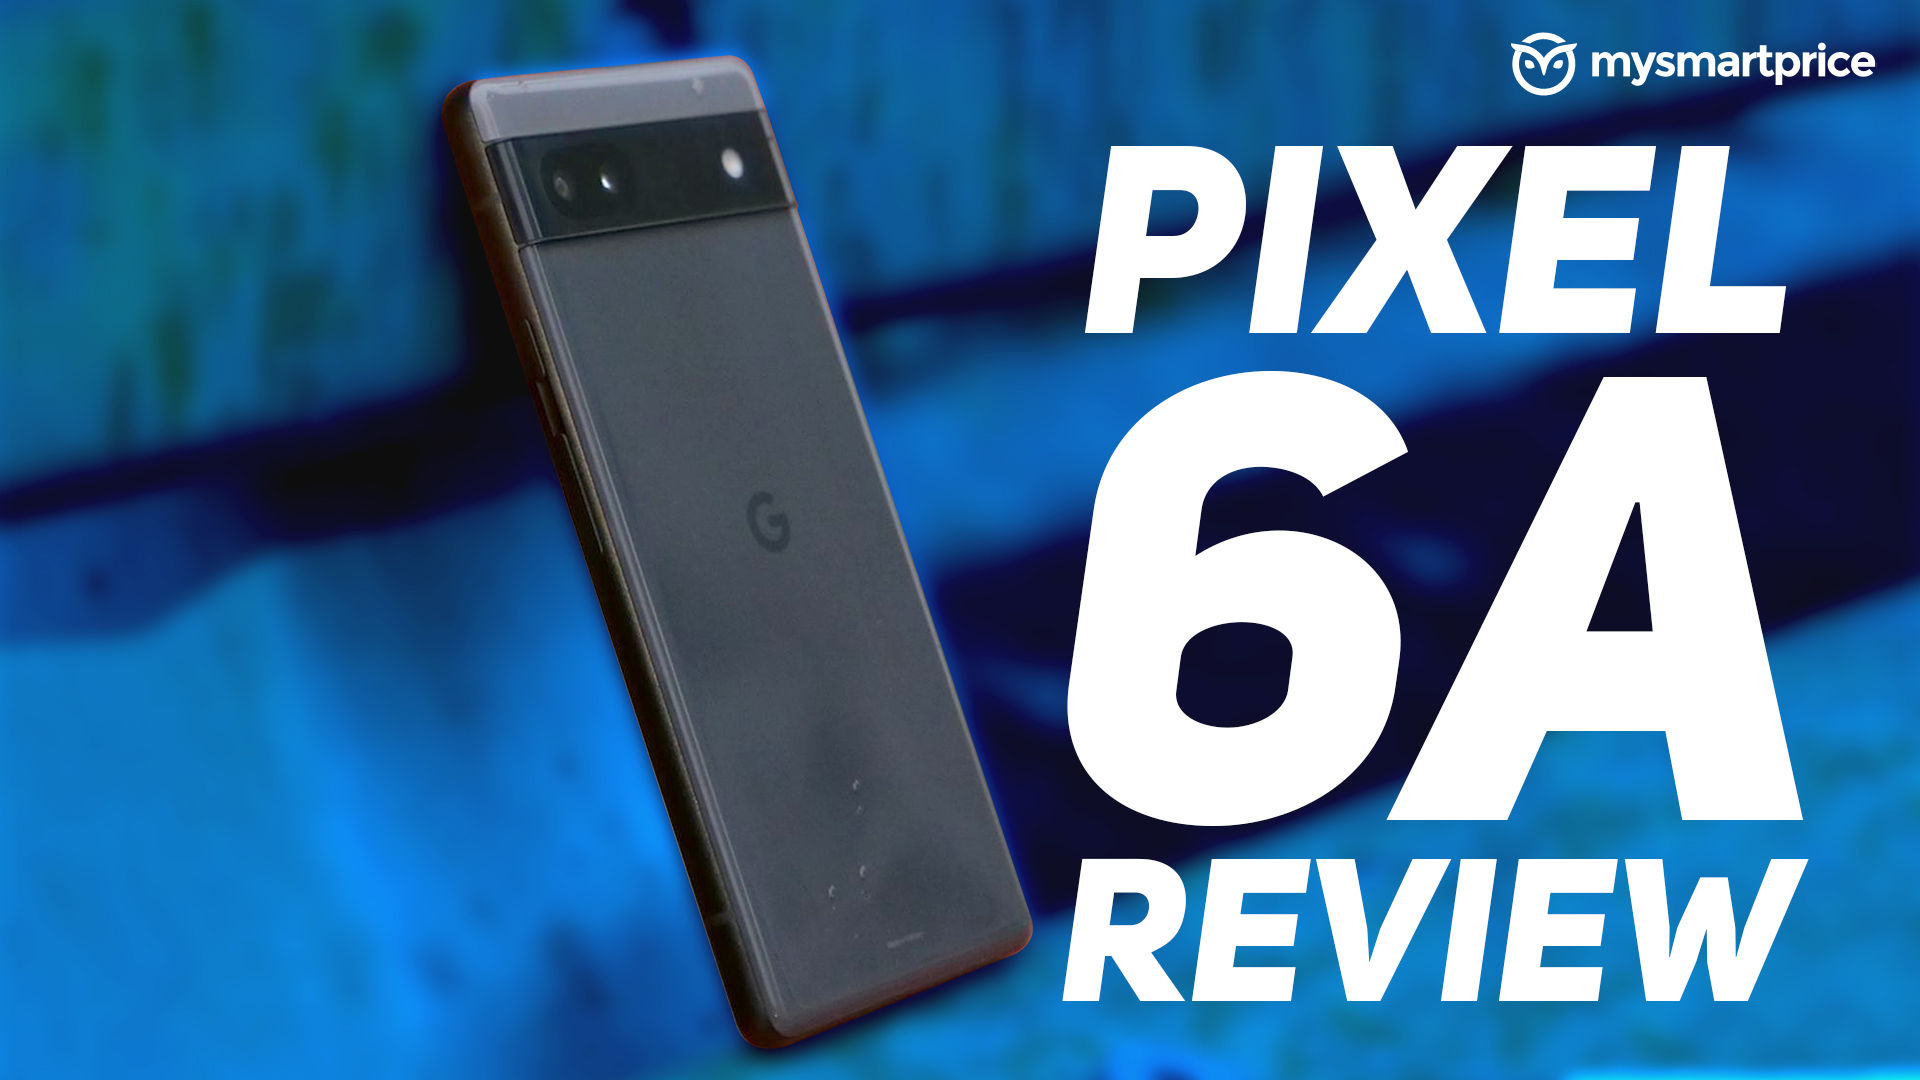 Google Pixel 6a hits an alltime low price of 329 during Amazon Prime day   Mobile News